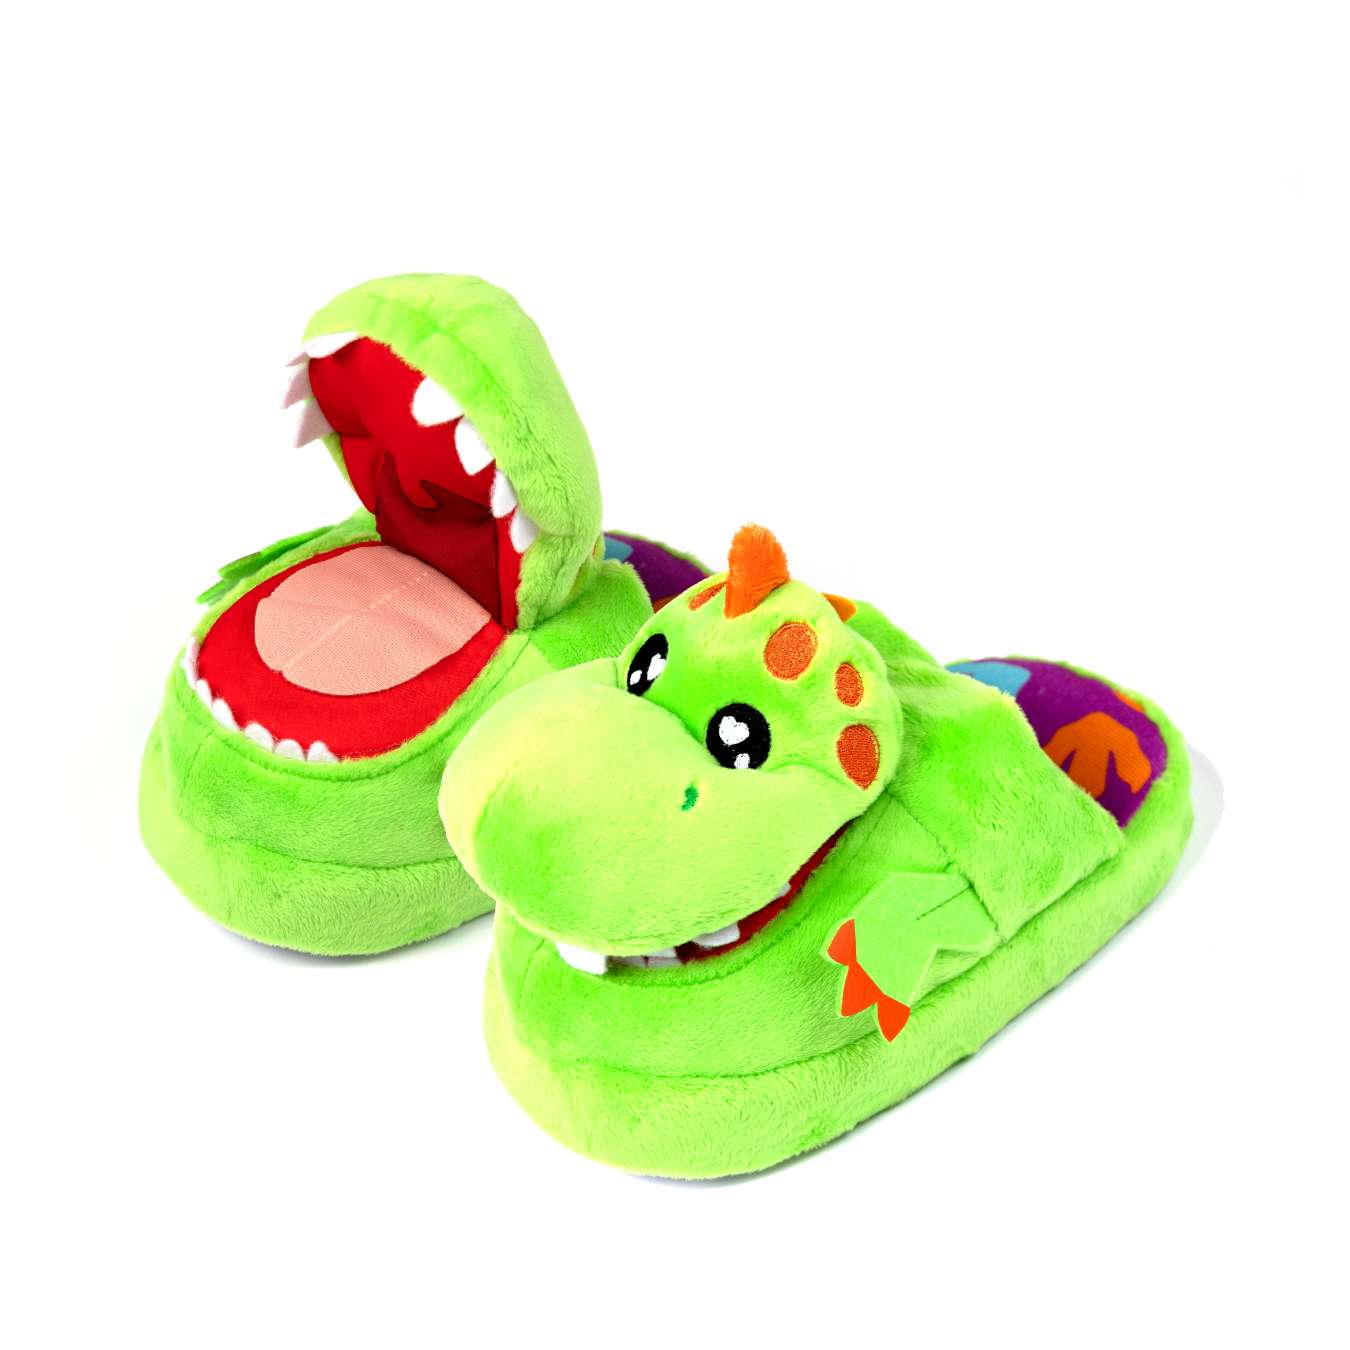 View Stompeez Dinosaur Large Fun Animated Kids Slippers Soft And Comfy To Wear Anti Slip Soles High Street TV information